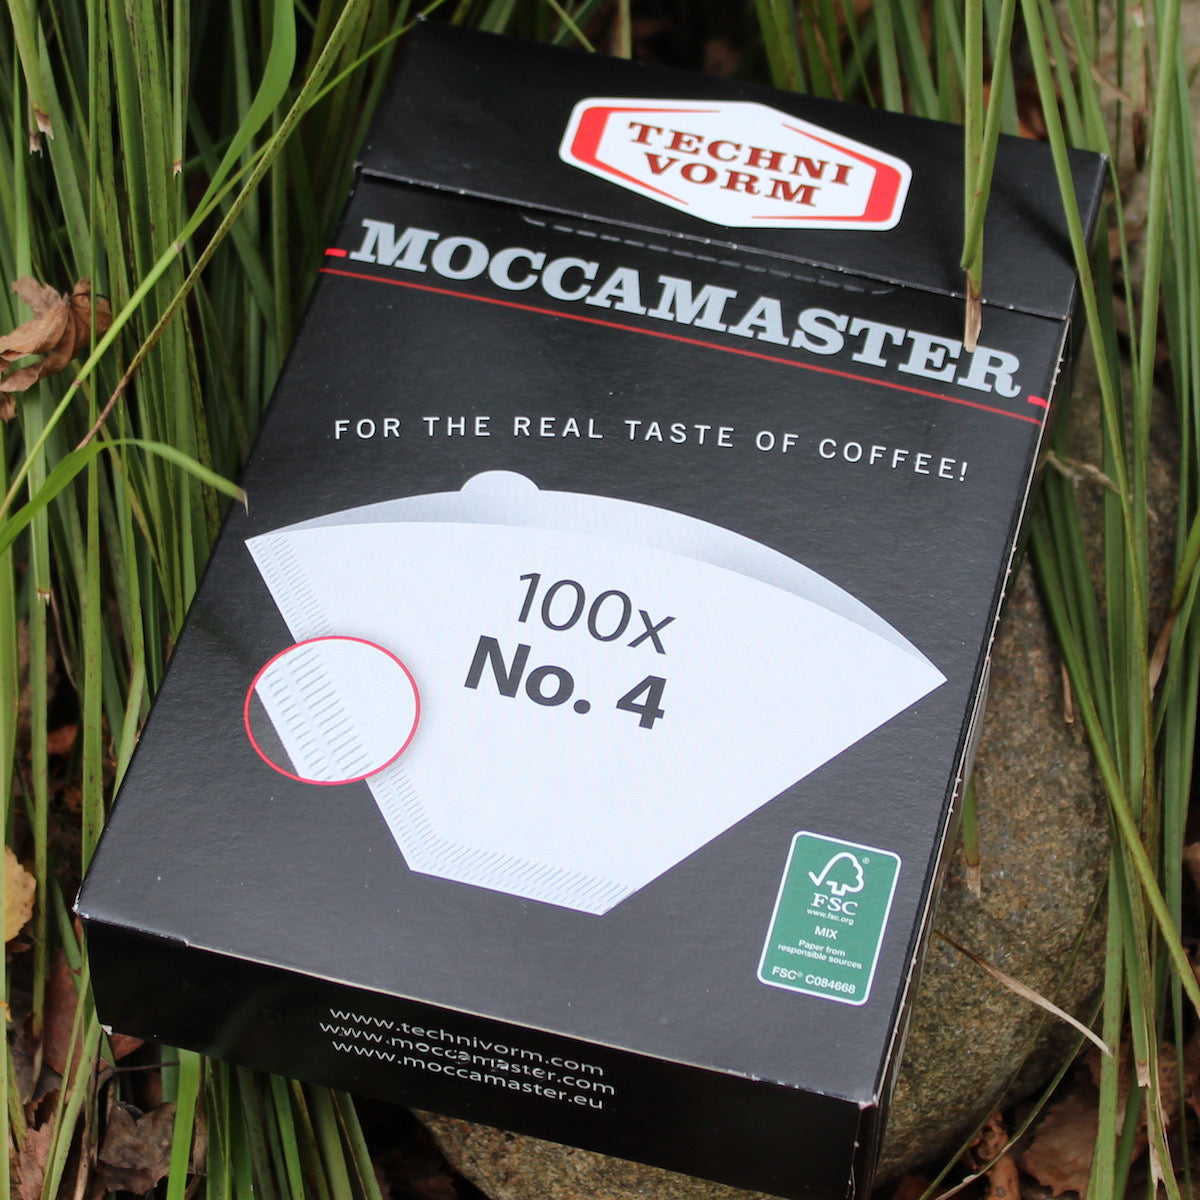 Moccamaster #4 Filters Coffee Filters from The Town Roaster